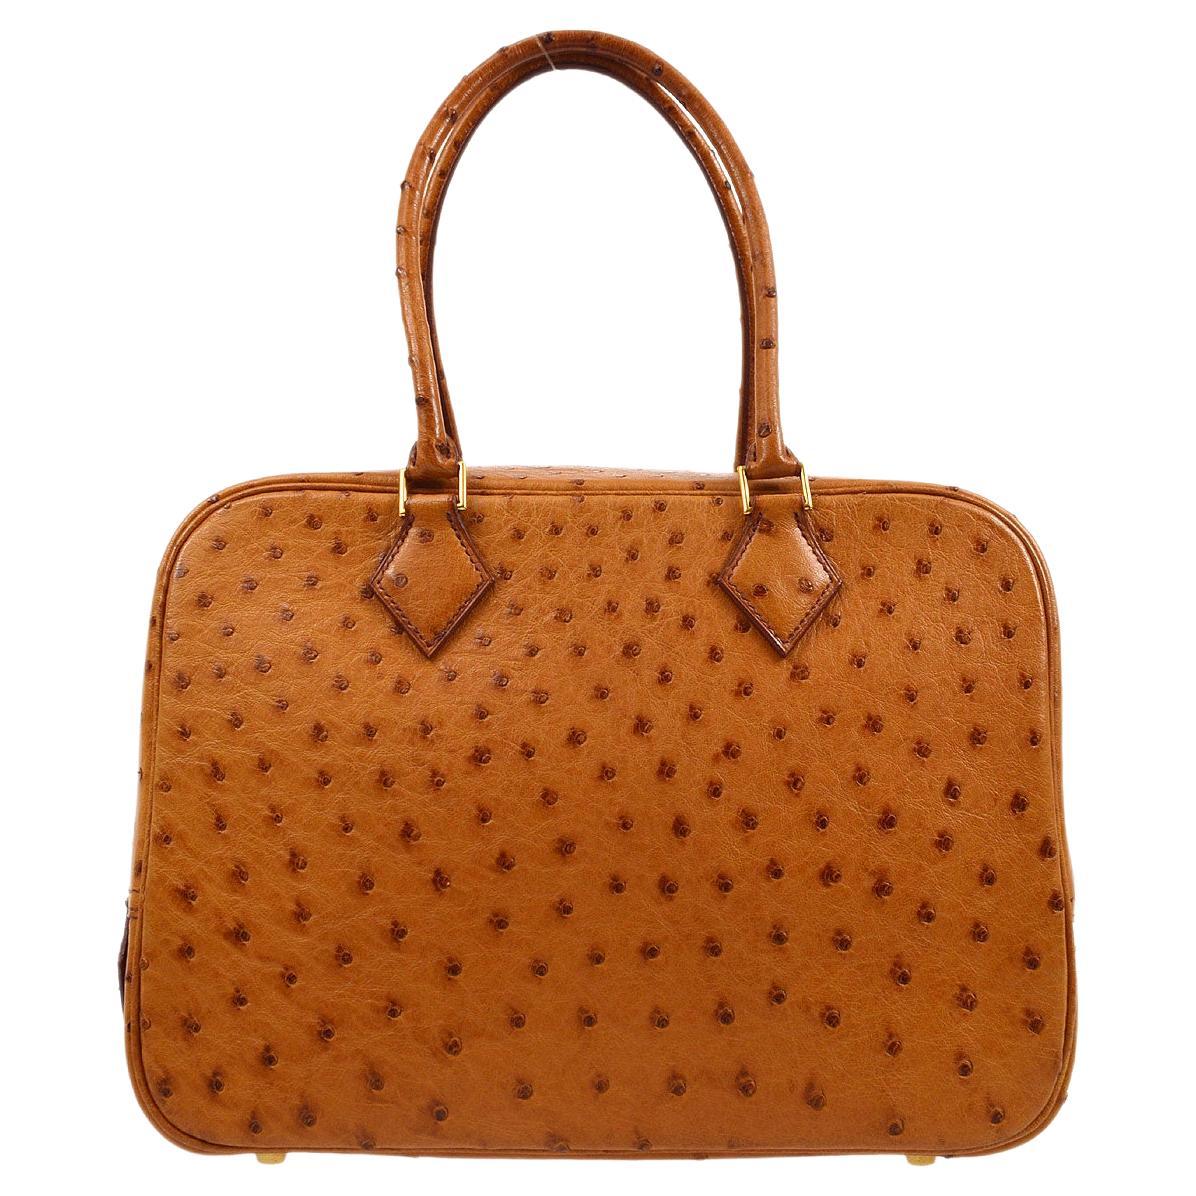 Saffron Plume 28cm in Ostrich Leather with Gold Hardware, 2001